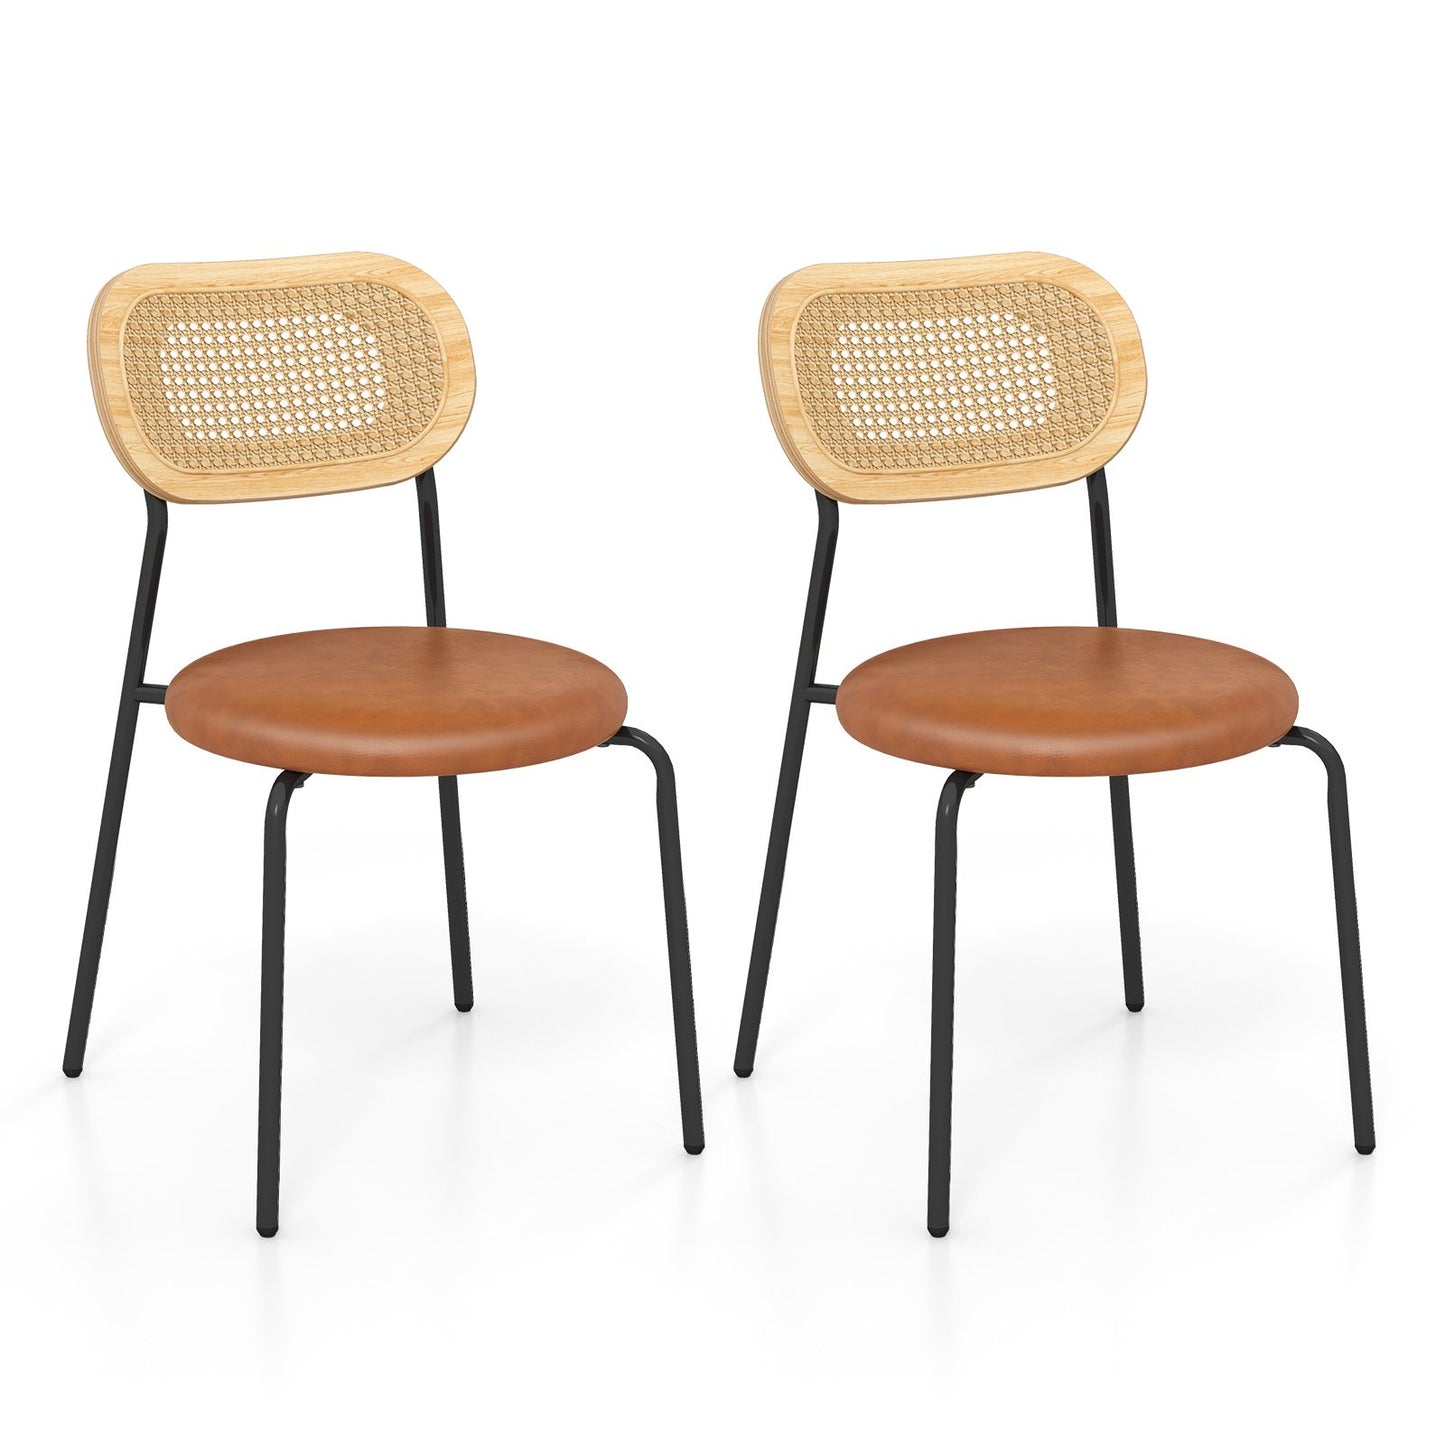 Set of 2 Rattan Dining Chair with Metal Legs, Coffee - Gallery Canada